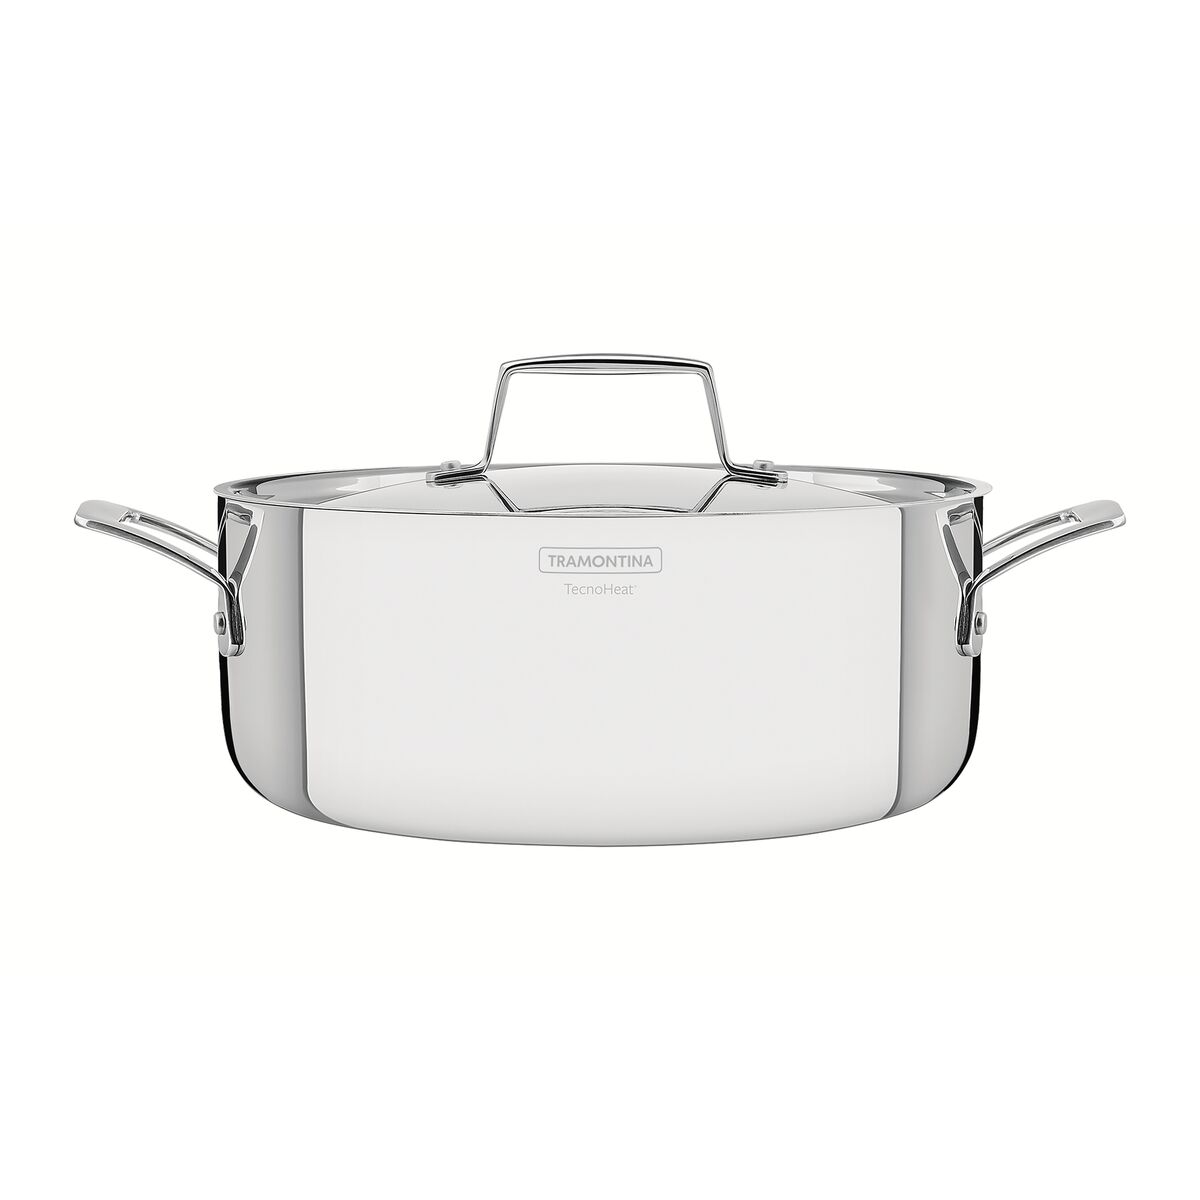 Tramontina Grano 24 cm 4.7 L stainless steel shallow casserole dish with tri-ply body, lid and handles